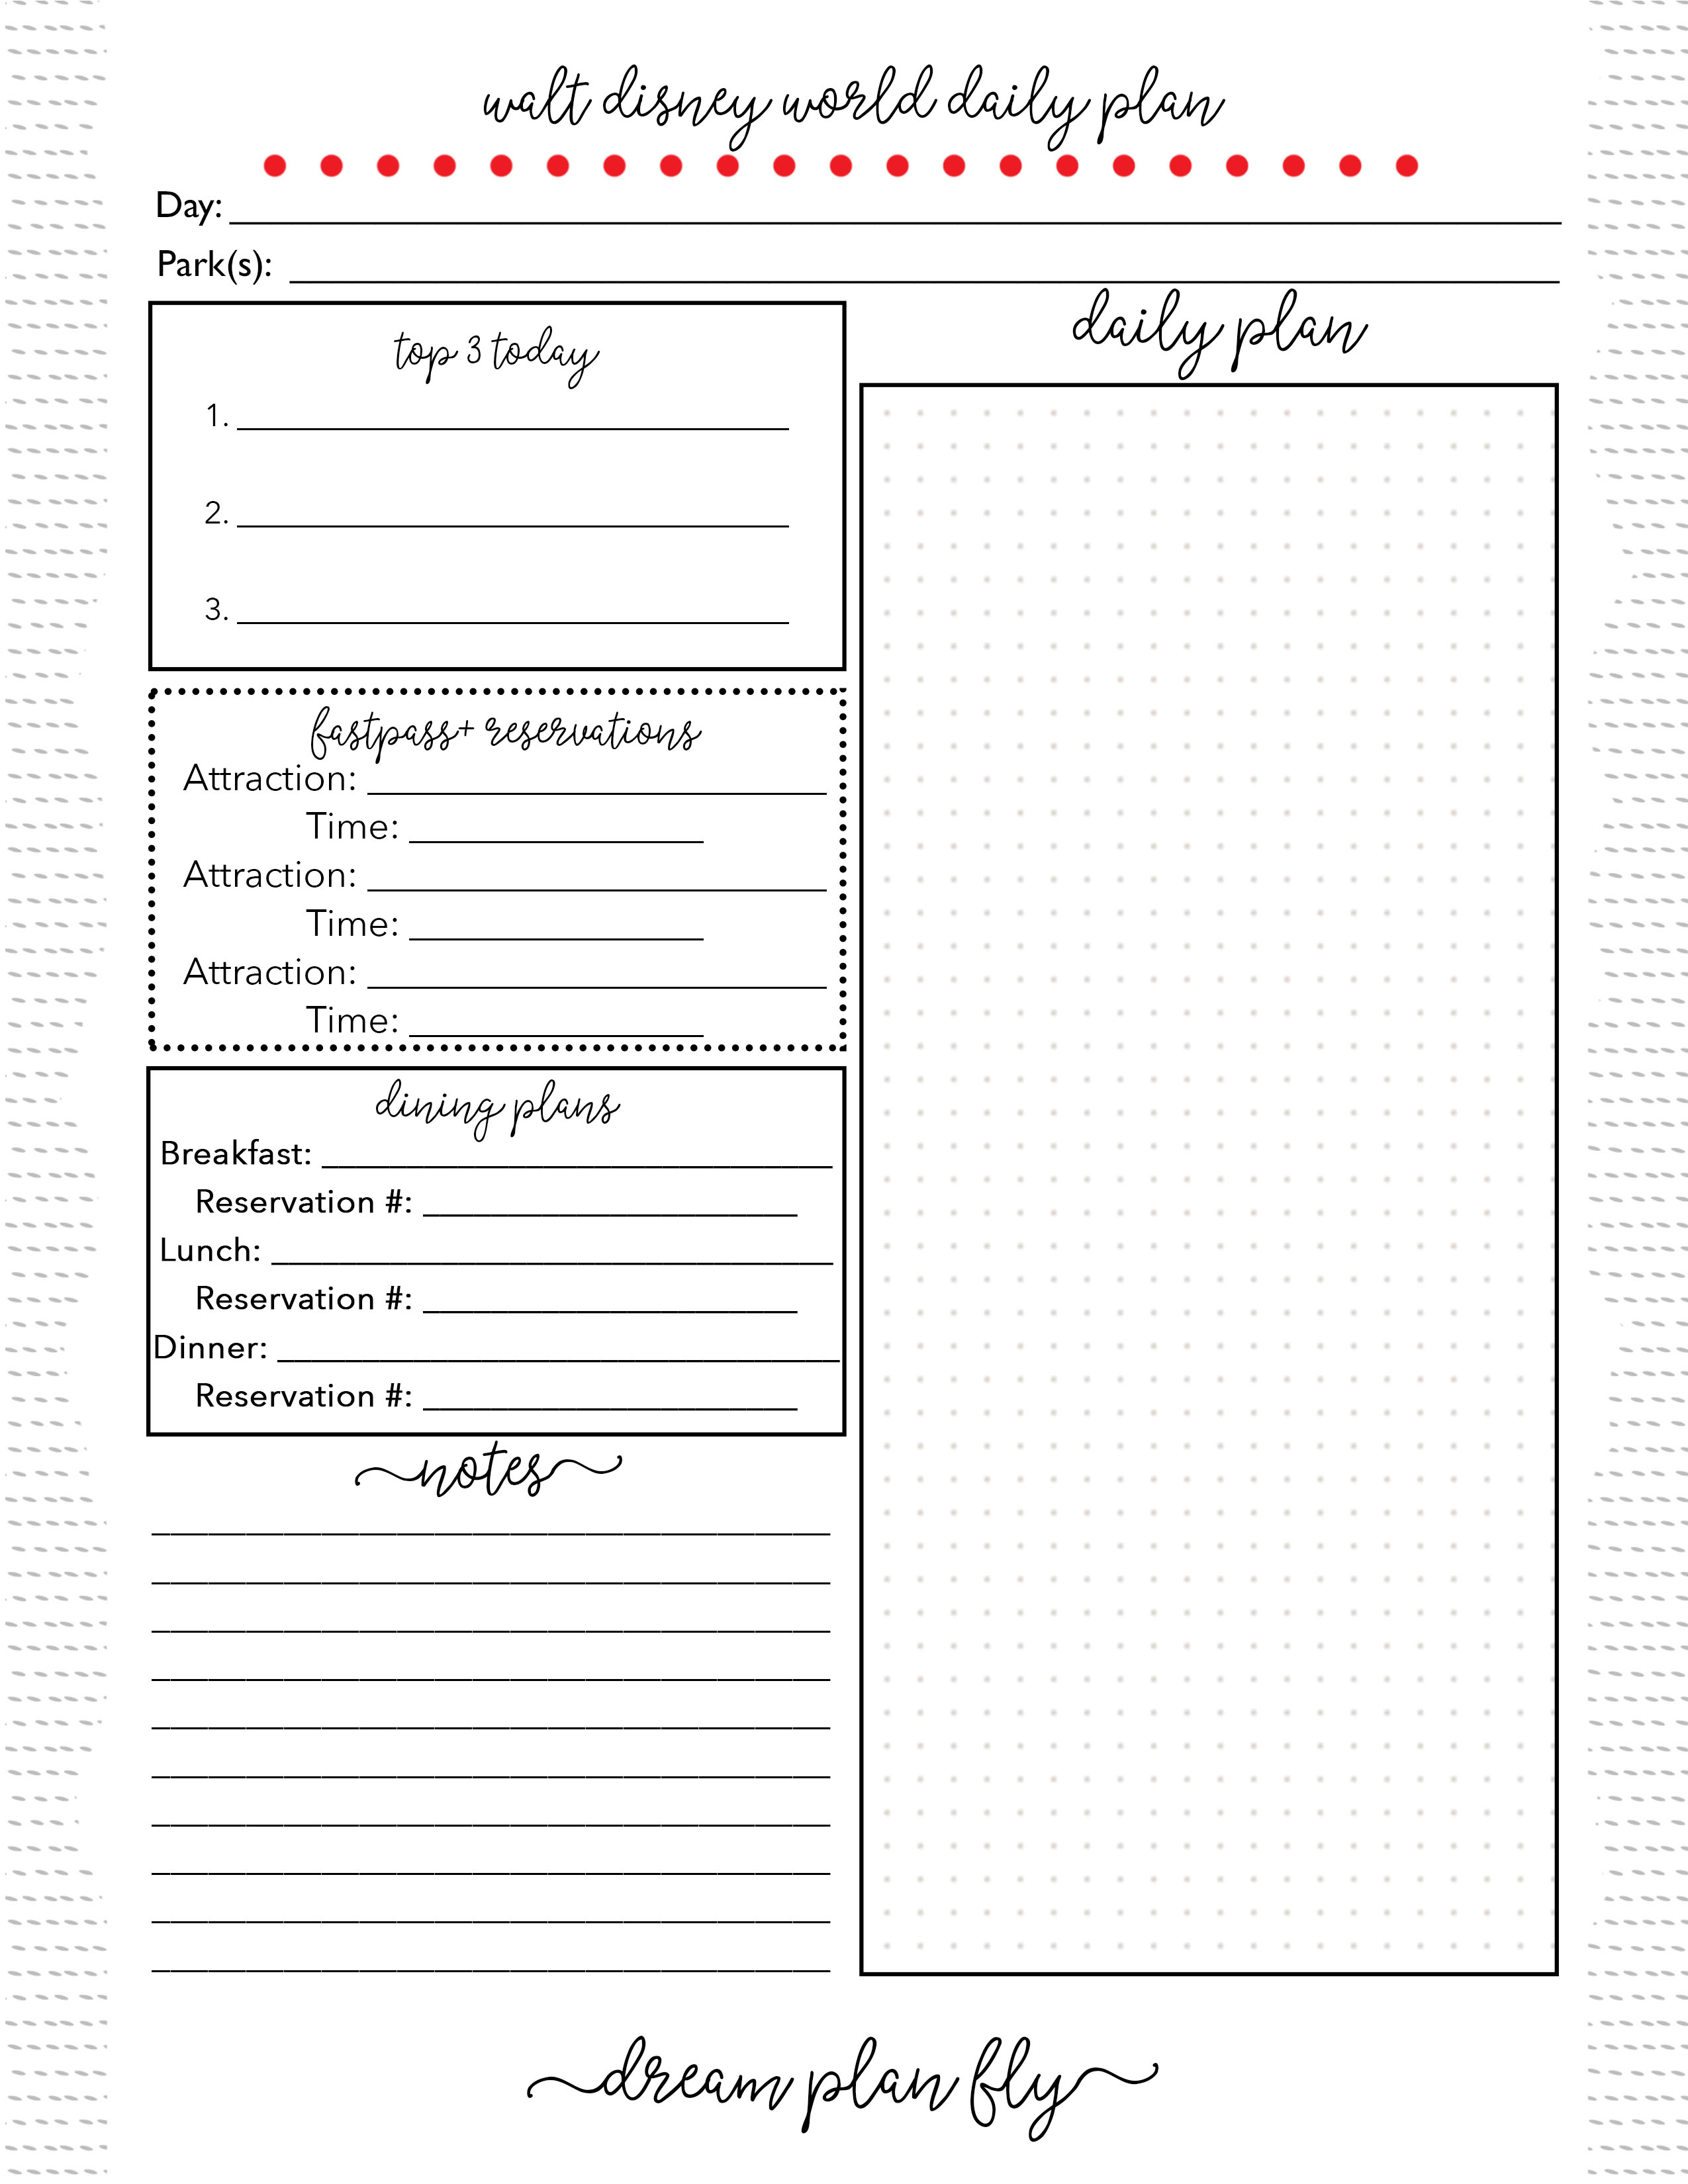 Free Printable Daily Planner For Walt Disney World  Dream intended for Disney Vacation Itinerary Template